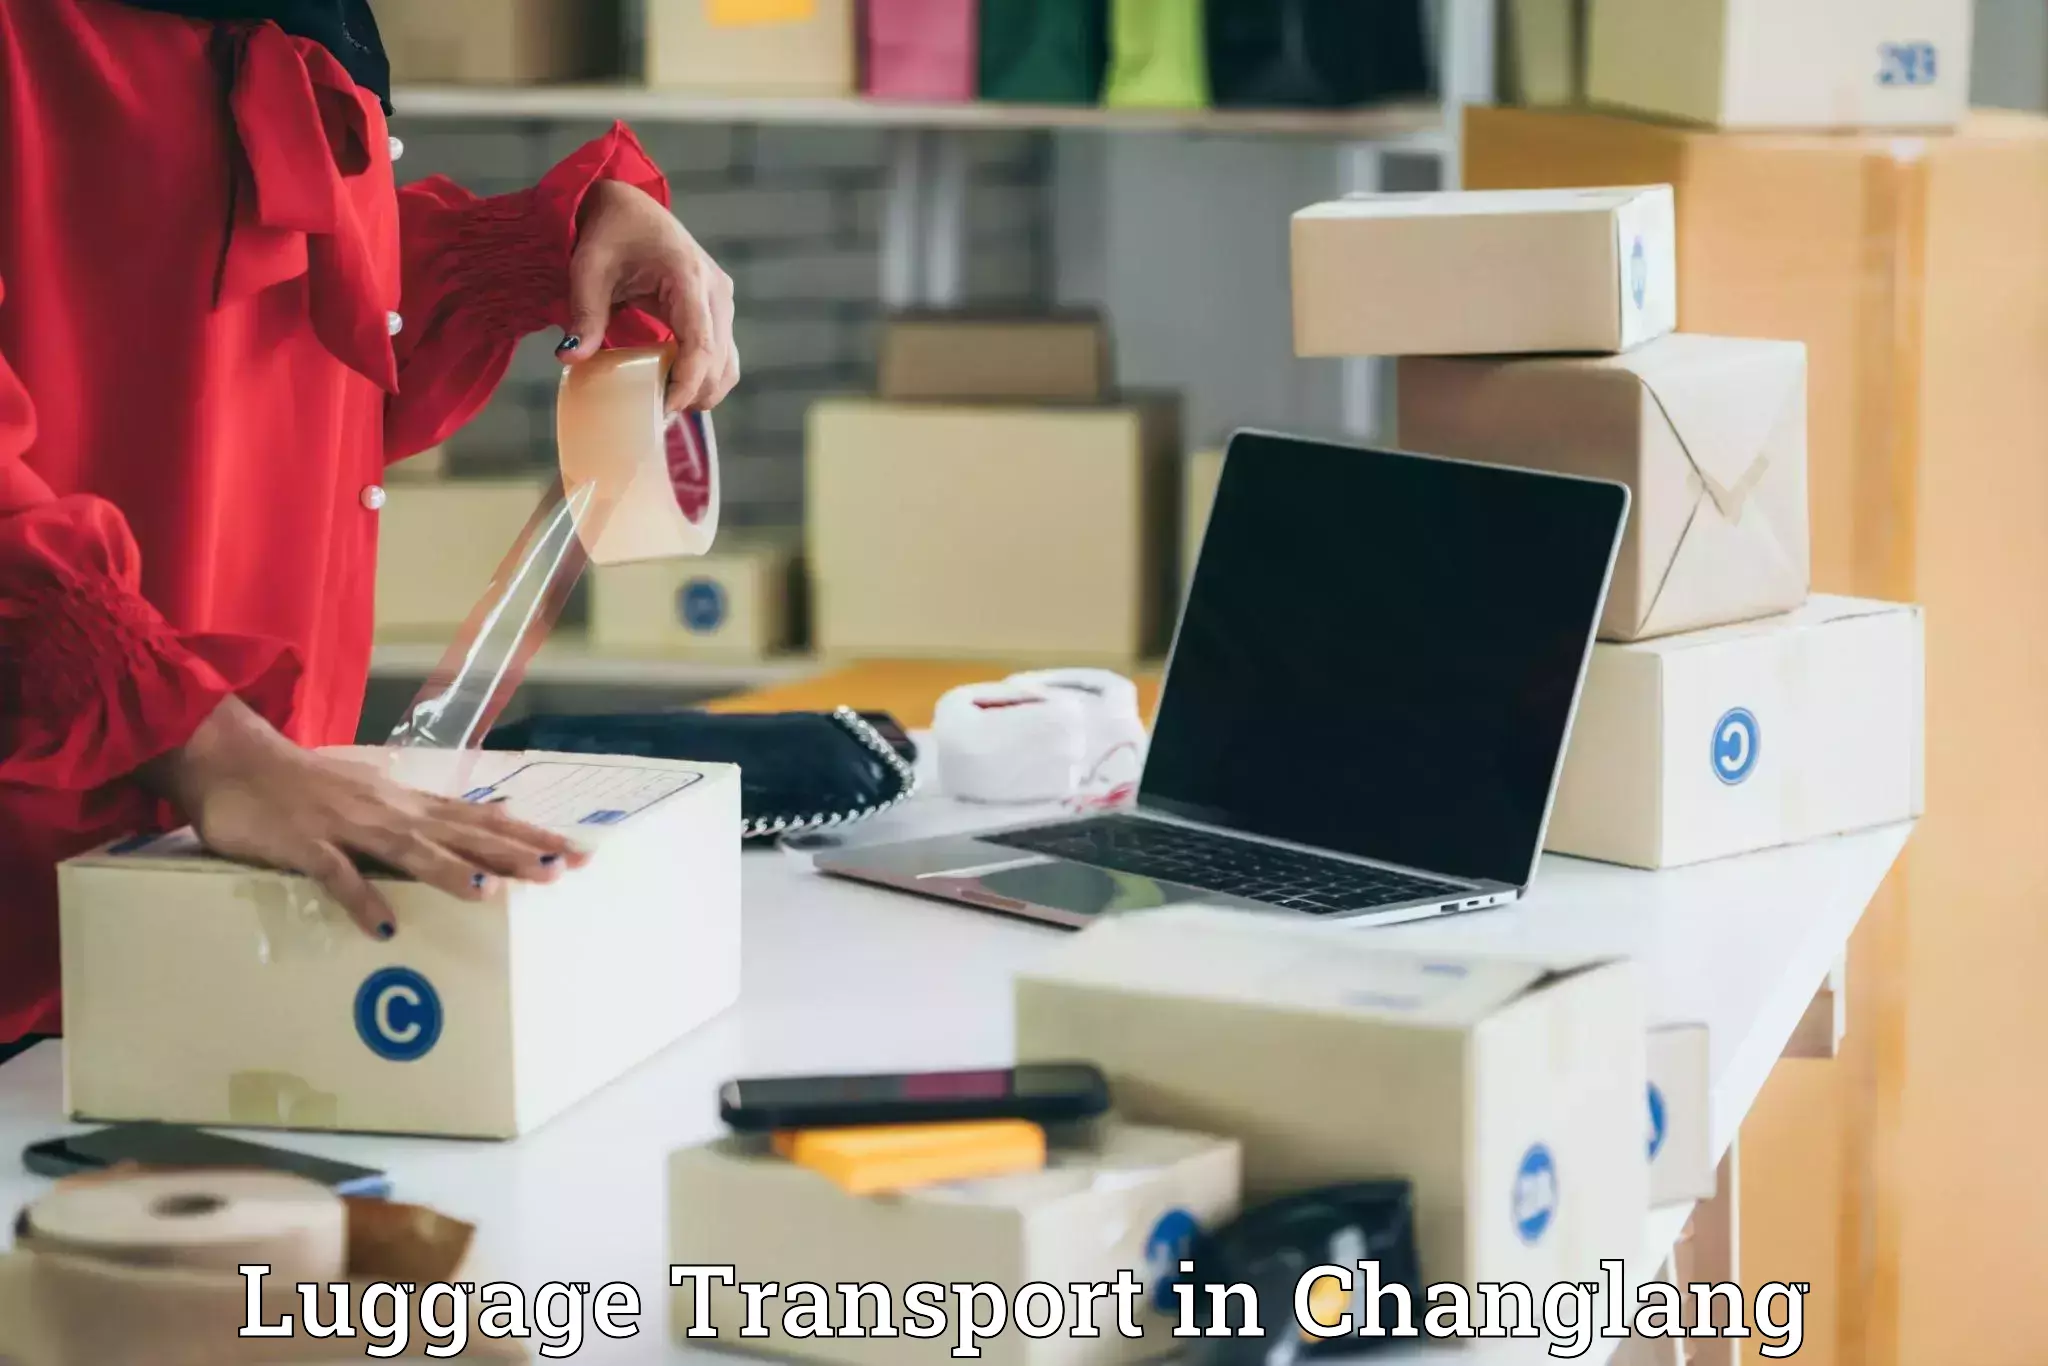 Luggage transport guidelines in Changlang